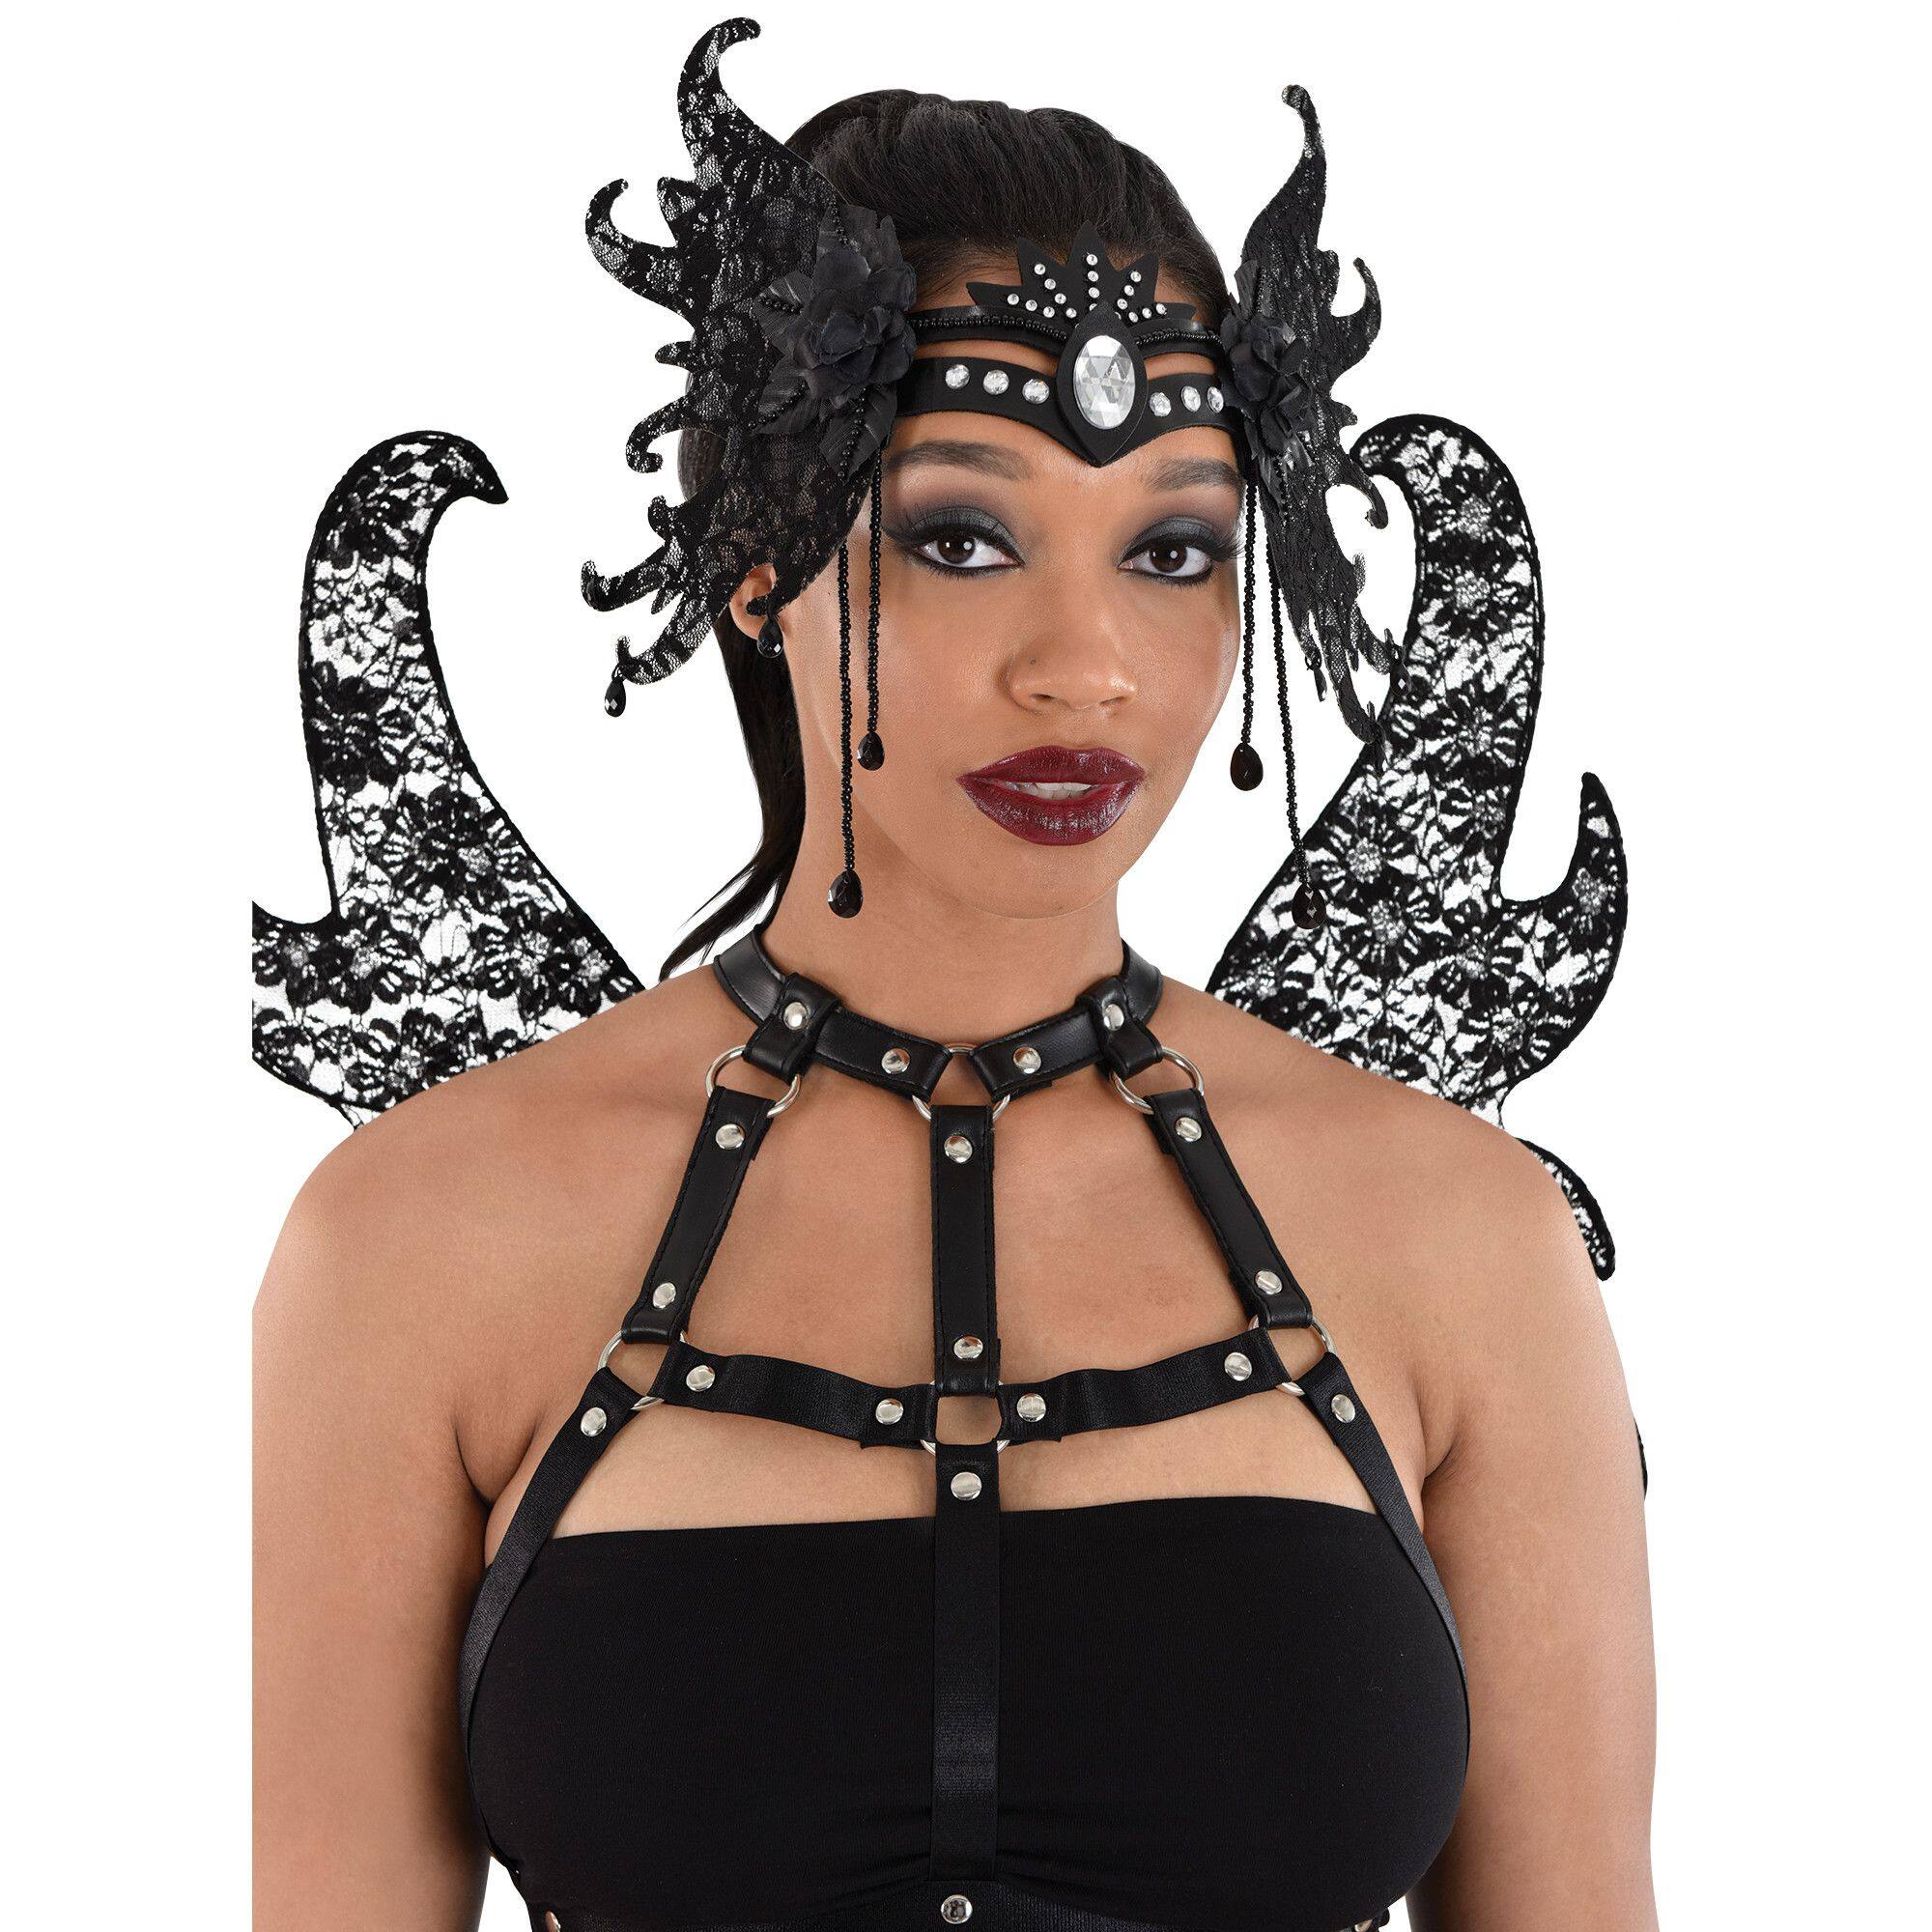 Goth Pixie Gemstone Headpiece, Black, One Size, Wearable Costume Accessory  for Halloween